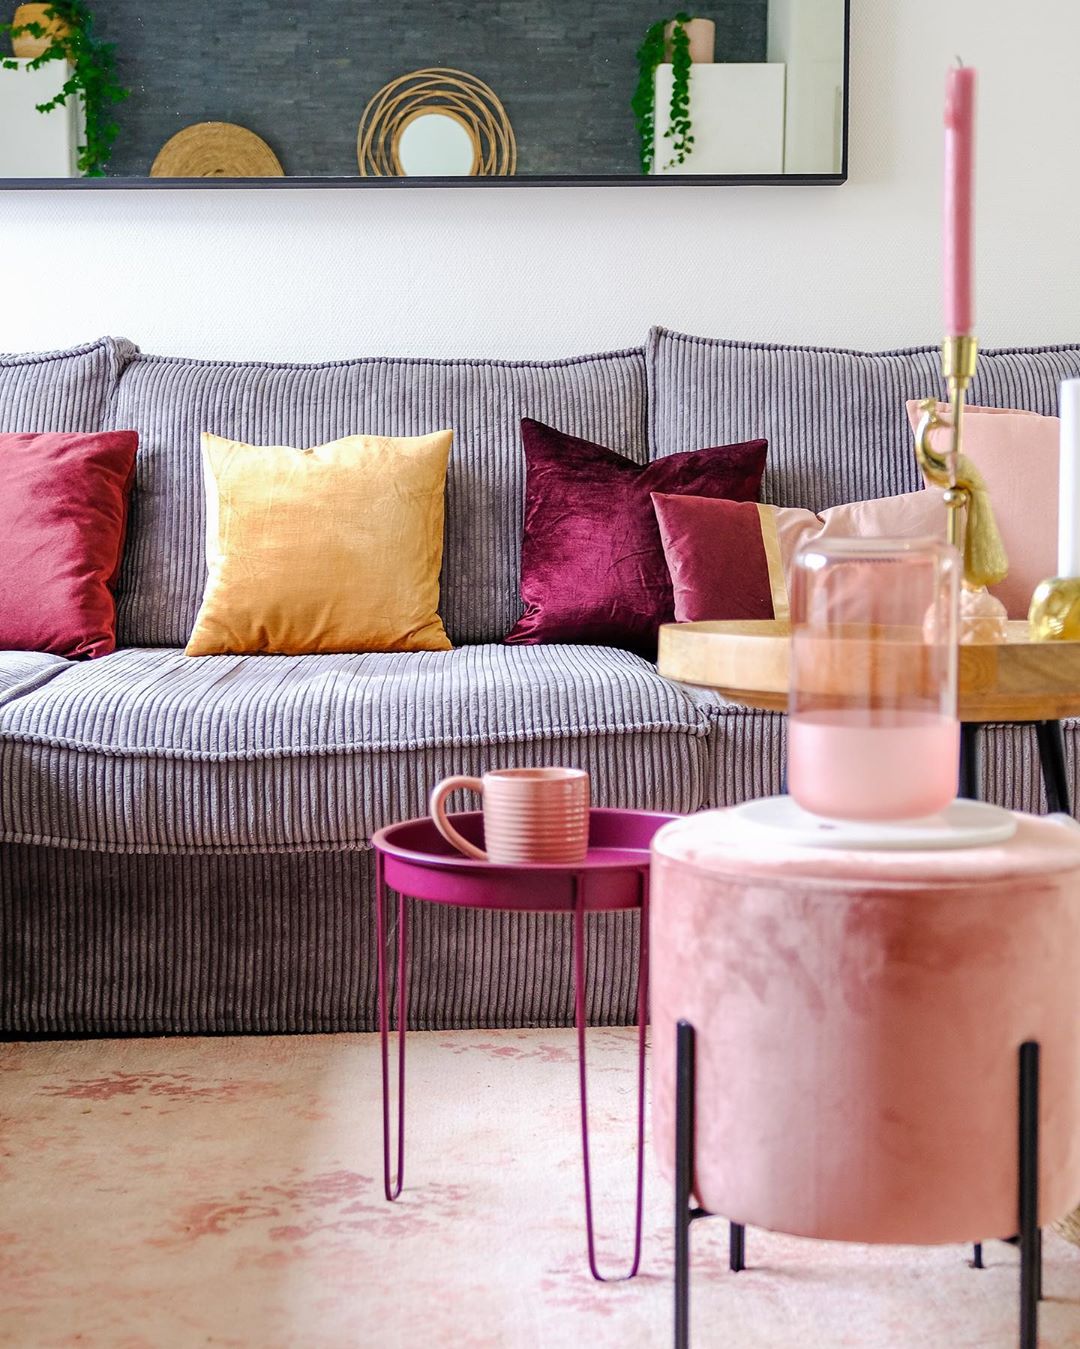 Pink and gold vintage items in living room. Photo by Instagram user @xcuseme.nl